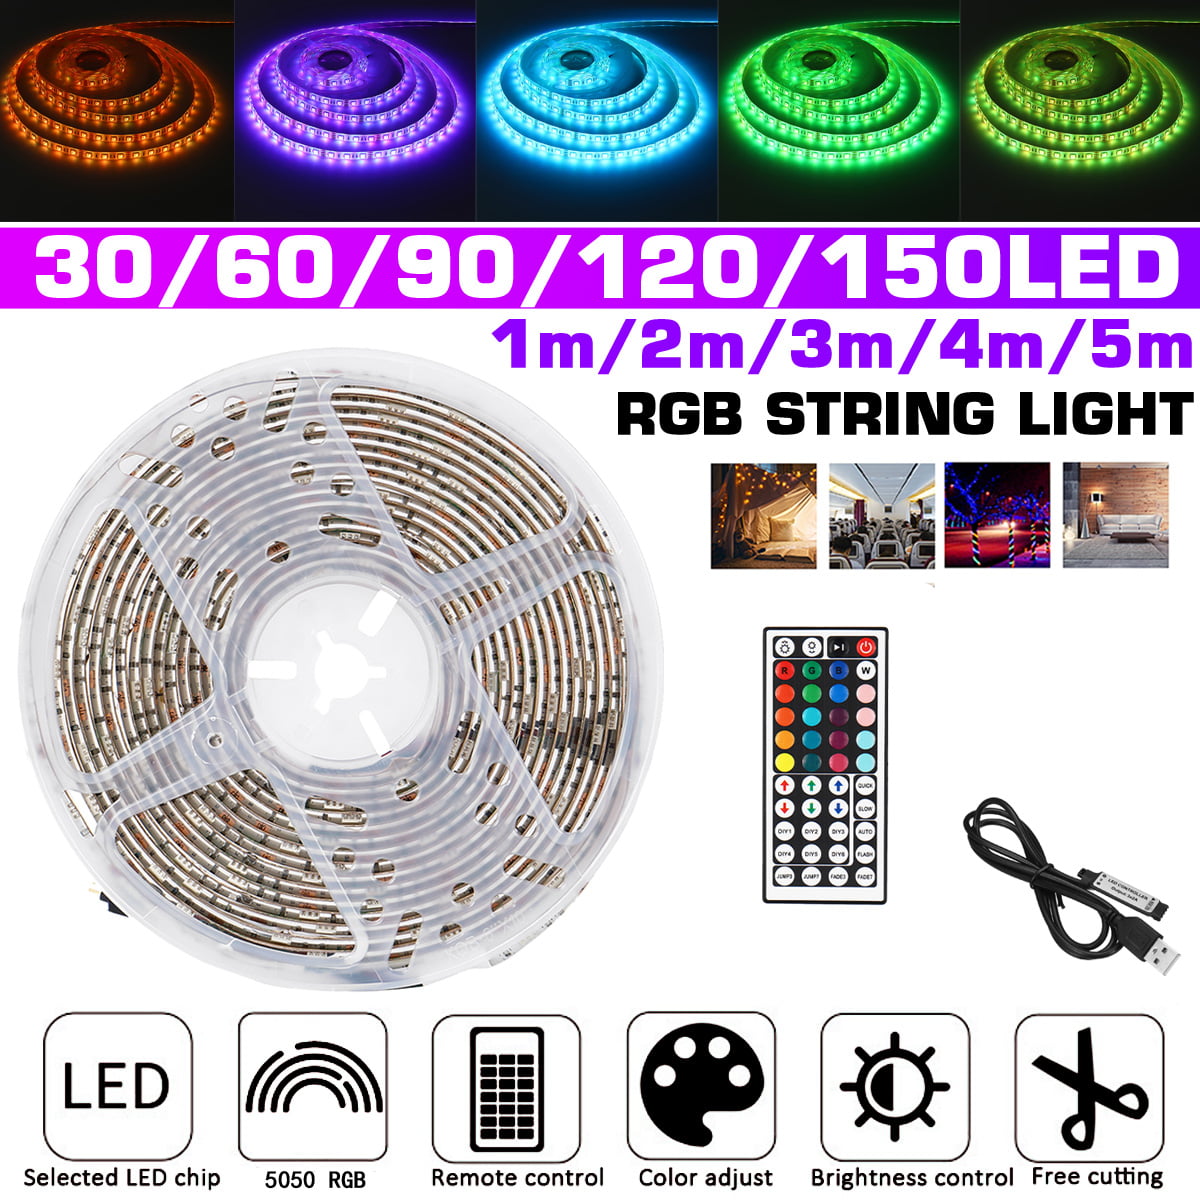 Details about   5-20M LED Strip Lights RGB Party Decor TV Lighting Color Changing Tape Cabinet